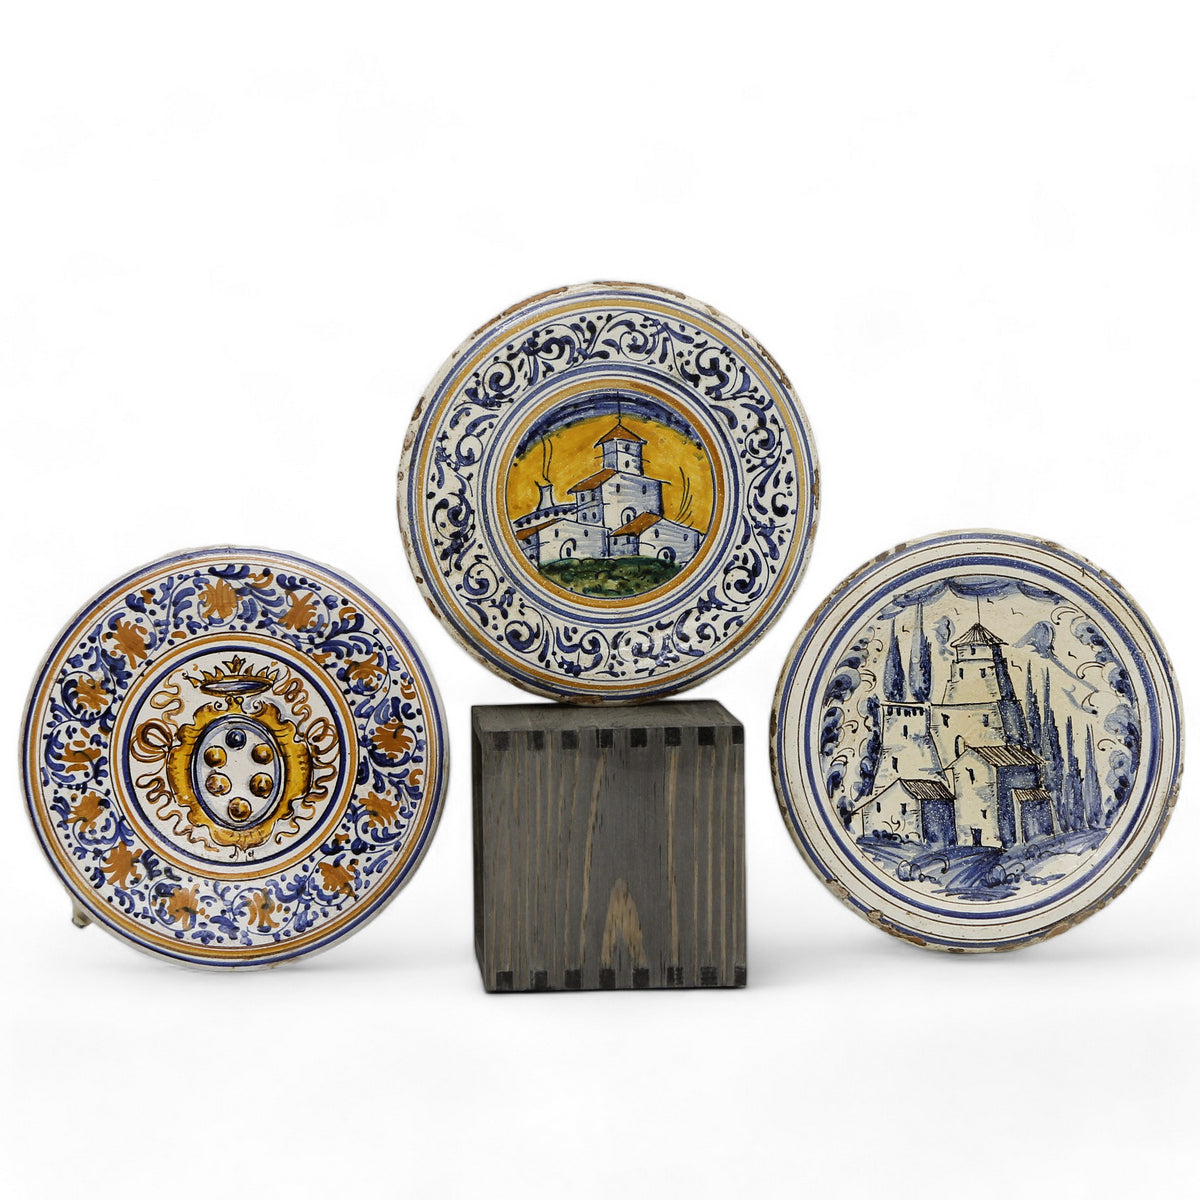 TUSCAN MAJOLICA: Small wall plates featuring traditional Tuscan designs - SET OF 3 PCS